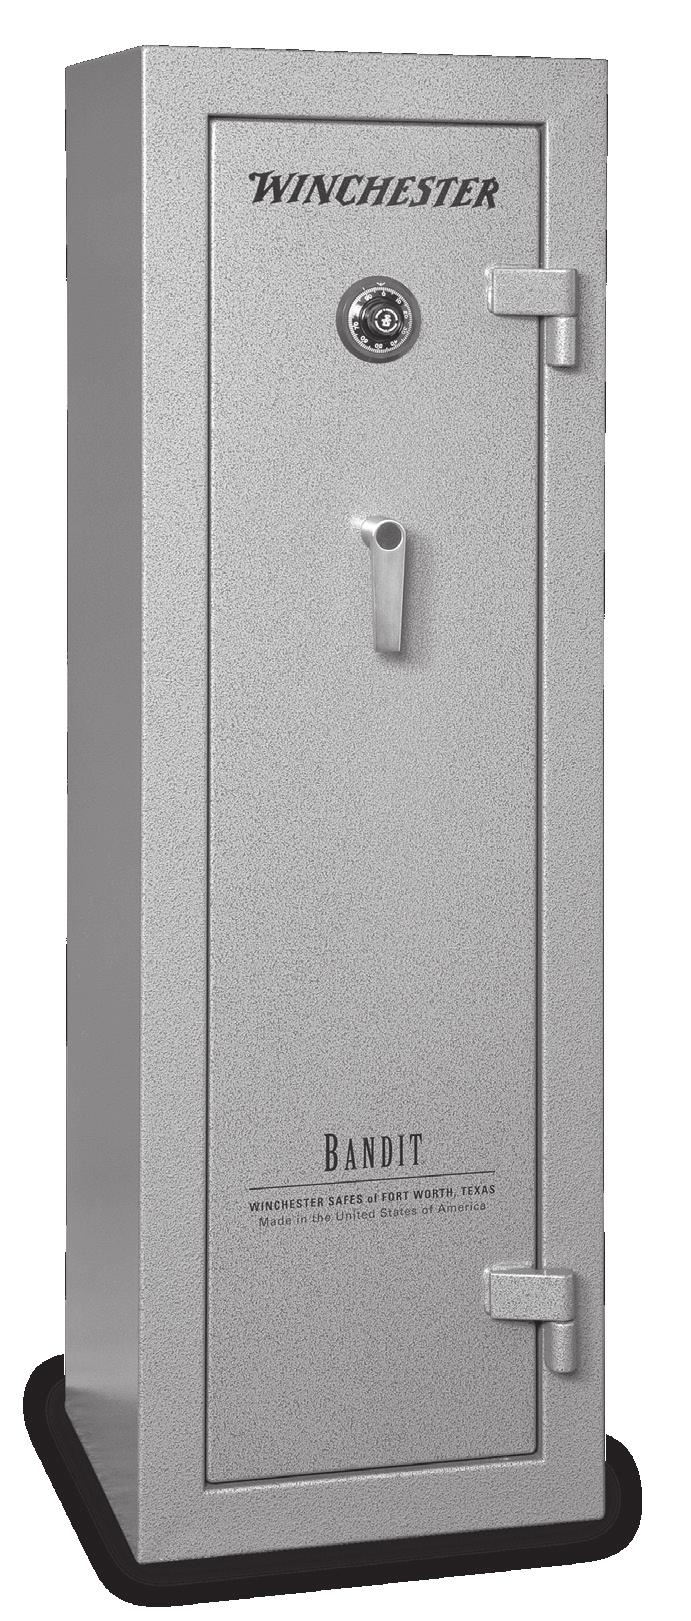 Congratulations on your purchase of a new Bandit Series personal security safe built in Fort Worth, Texas by Winchester Safes.